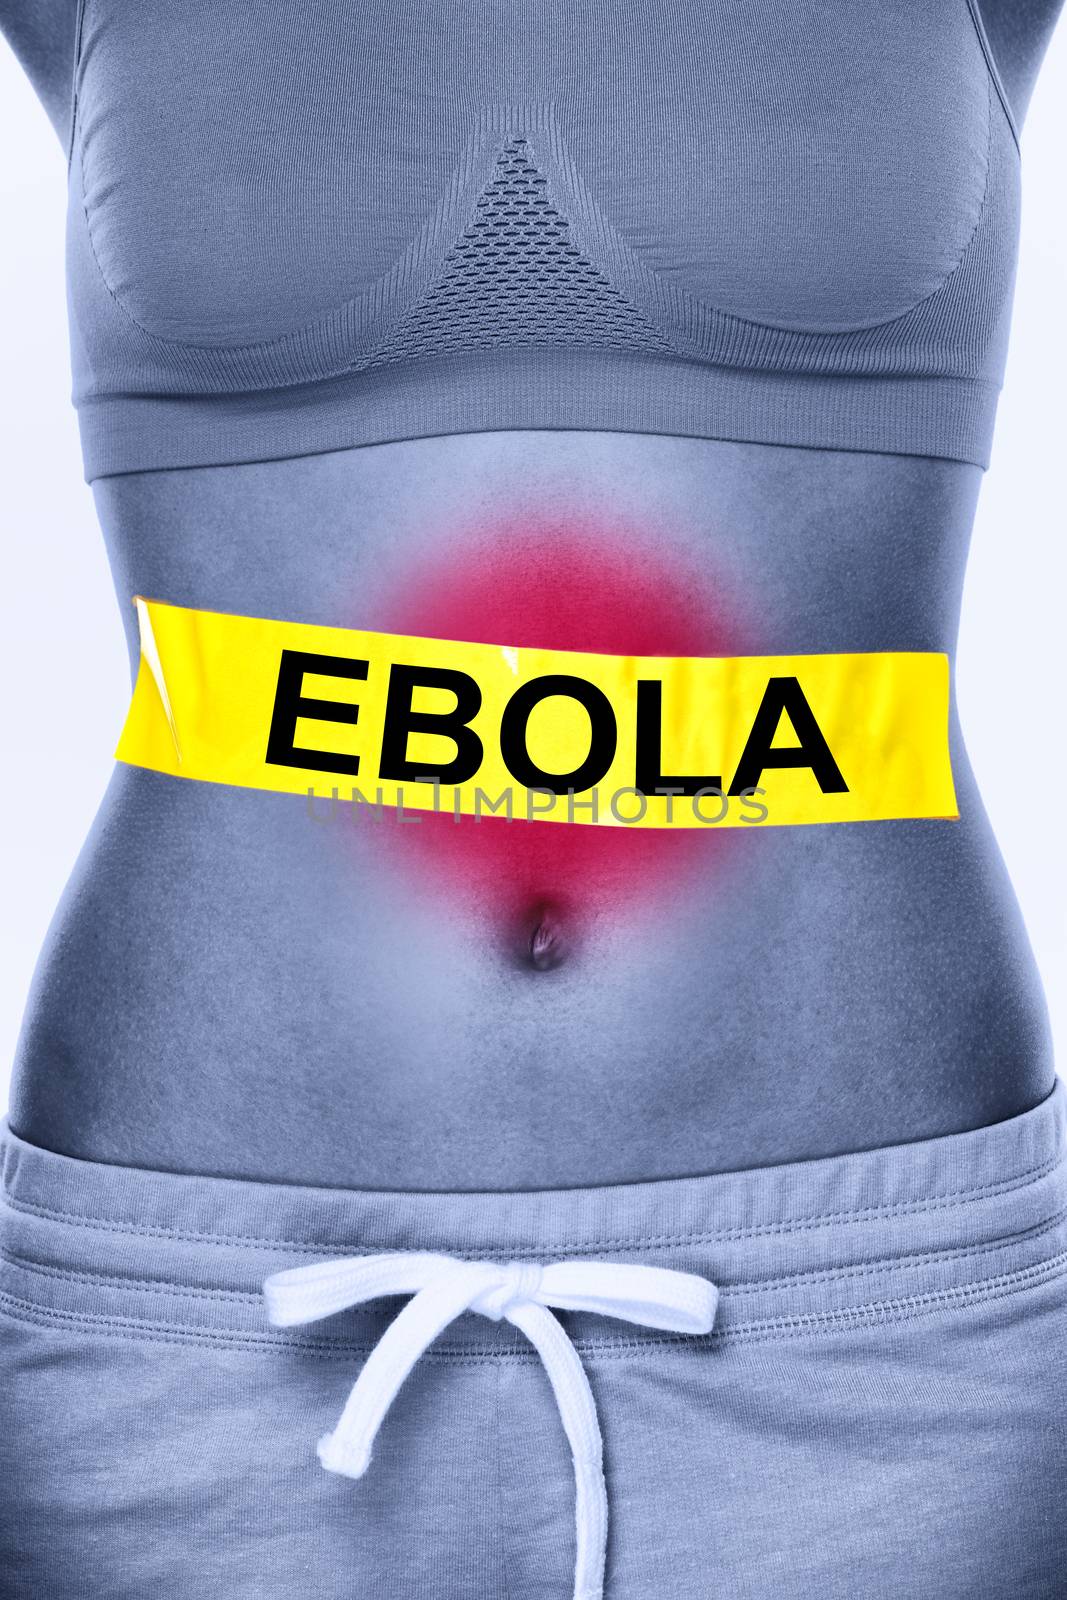 Ebola virus infection. Text on woman stomach symbolizing patient. Ebola symptoms inlcudes nausea, vomiting, diarrhea and stomach pain.